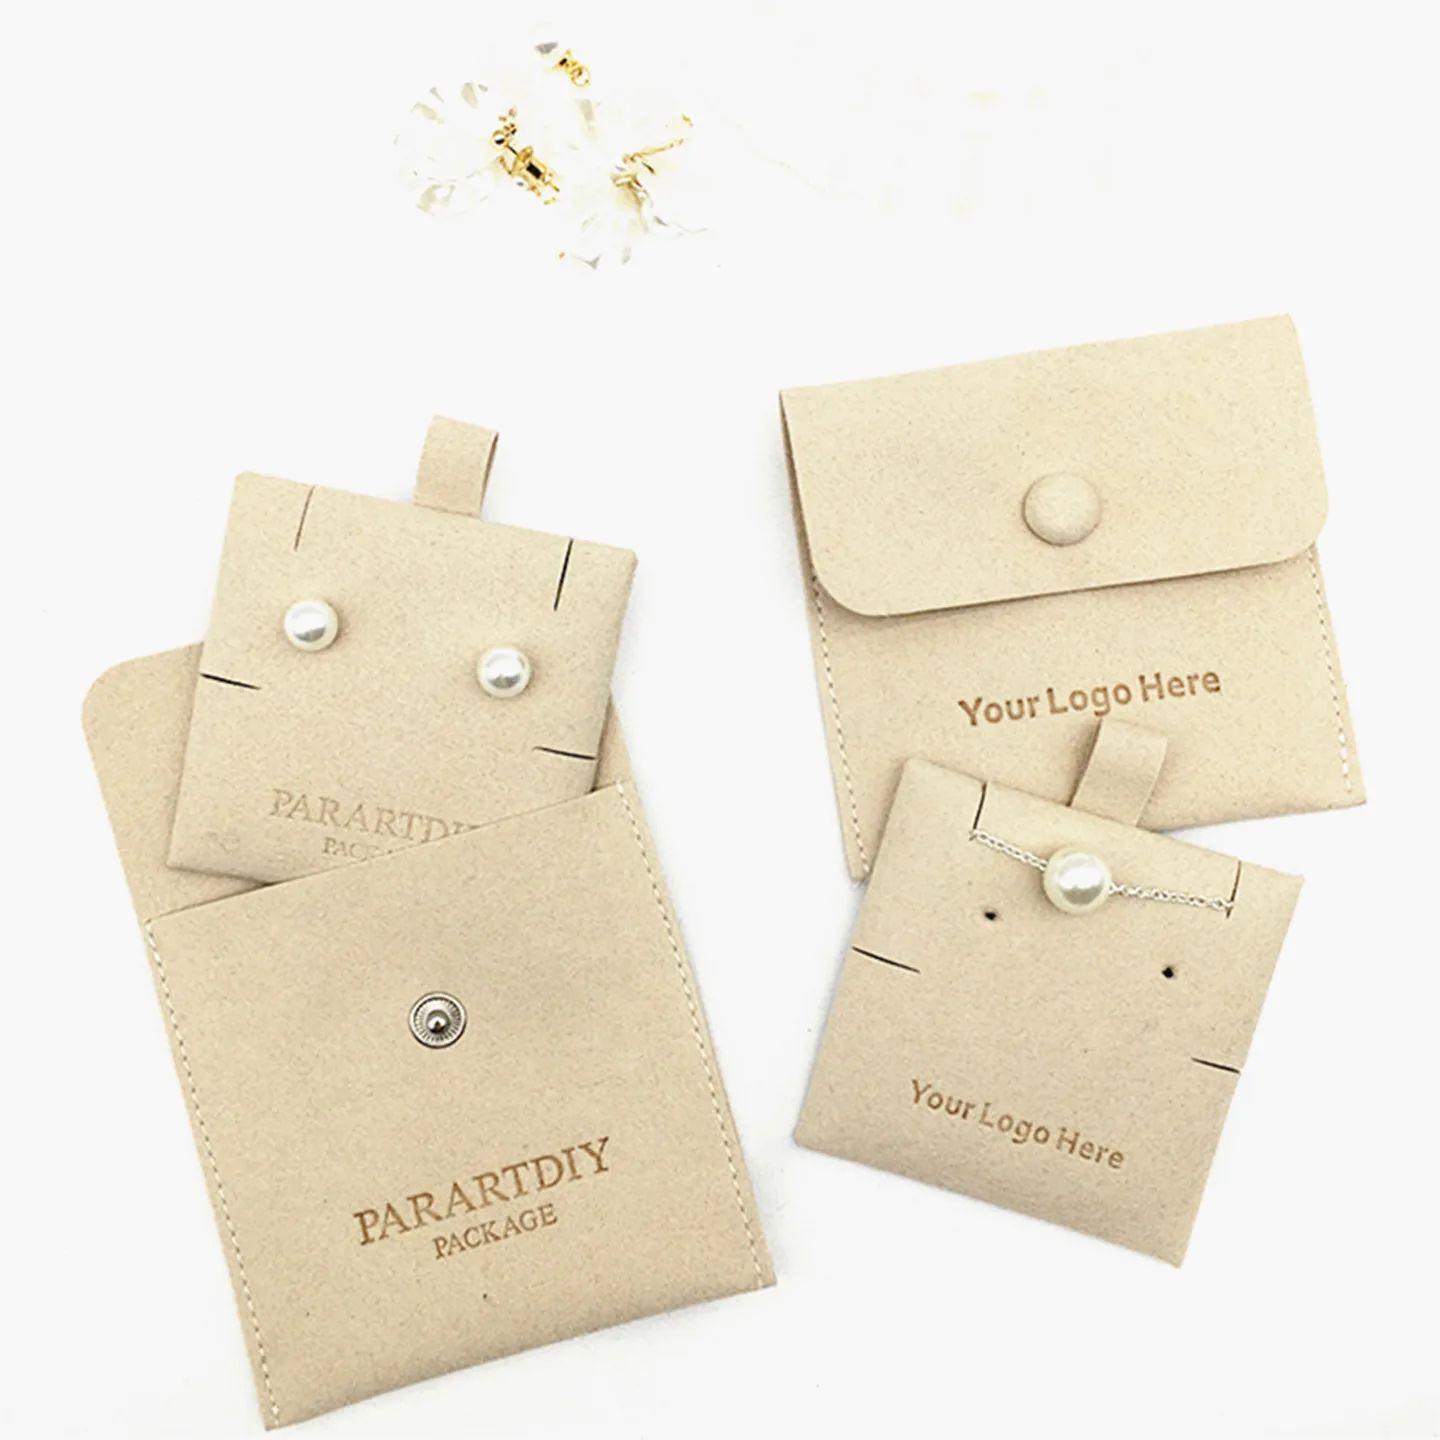 500 pieces of ivory color bulk per sonalized jewelry packaging bag necklace clip custom logo envelope bag jewelry bag microfiber